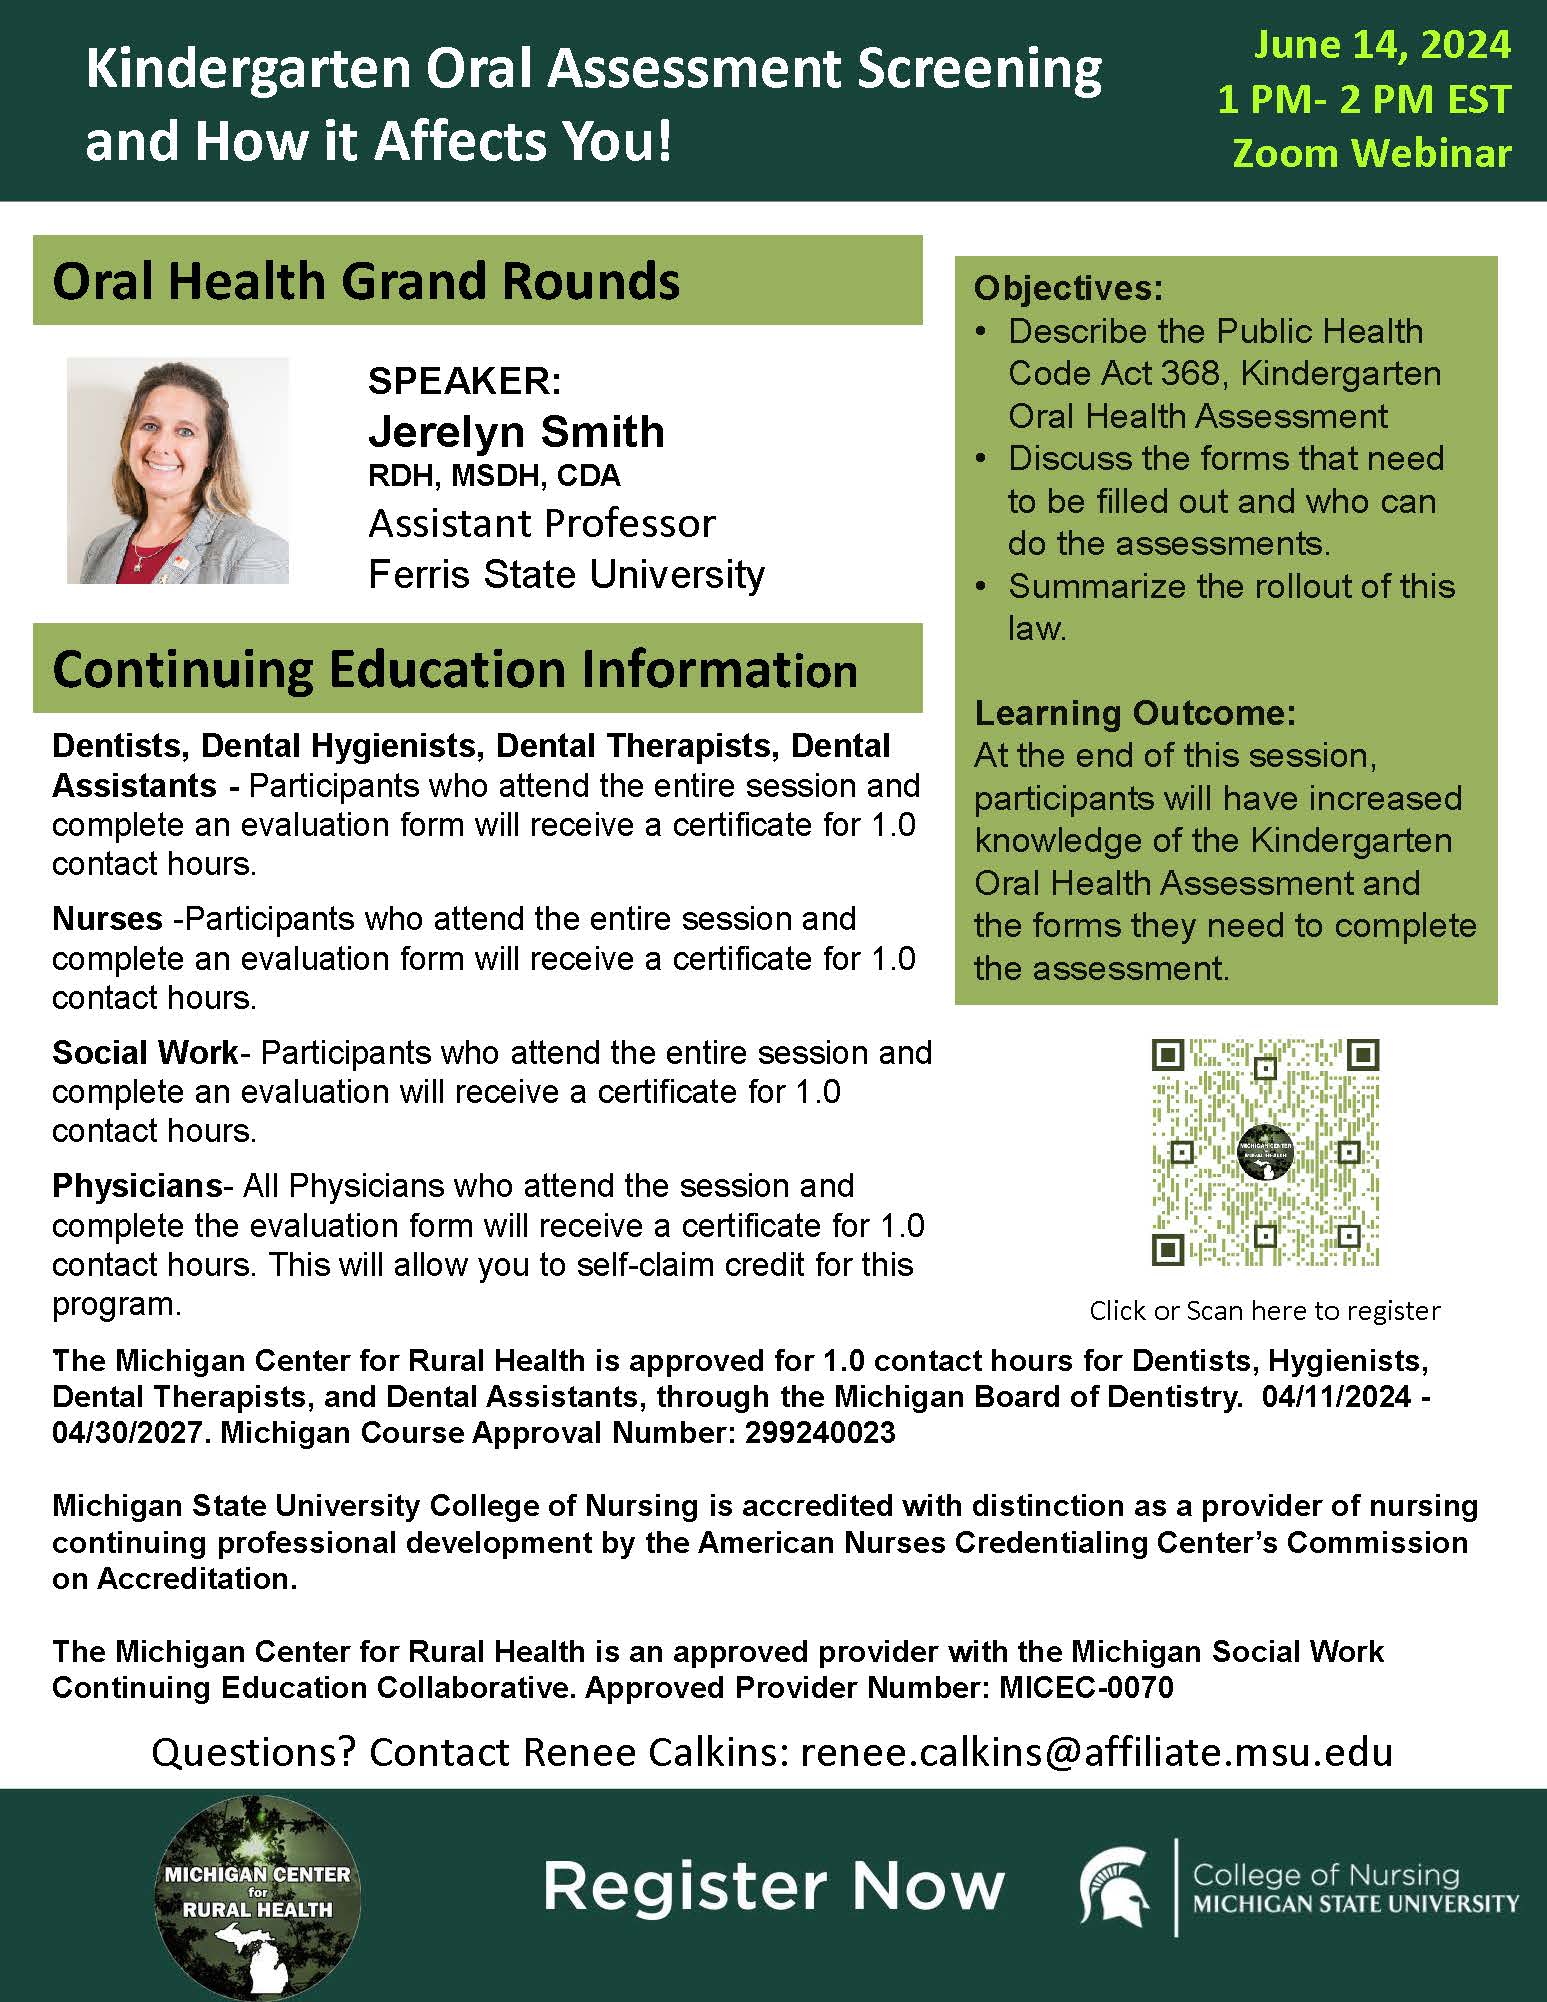 6.14.24 oral health grand rounds flyer